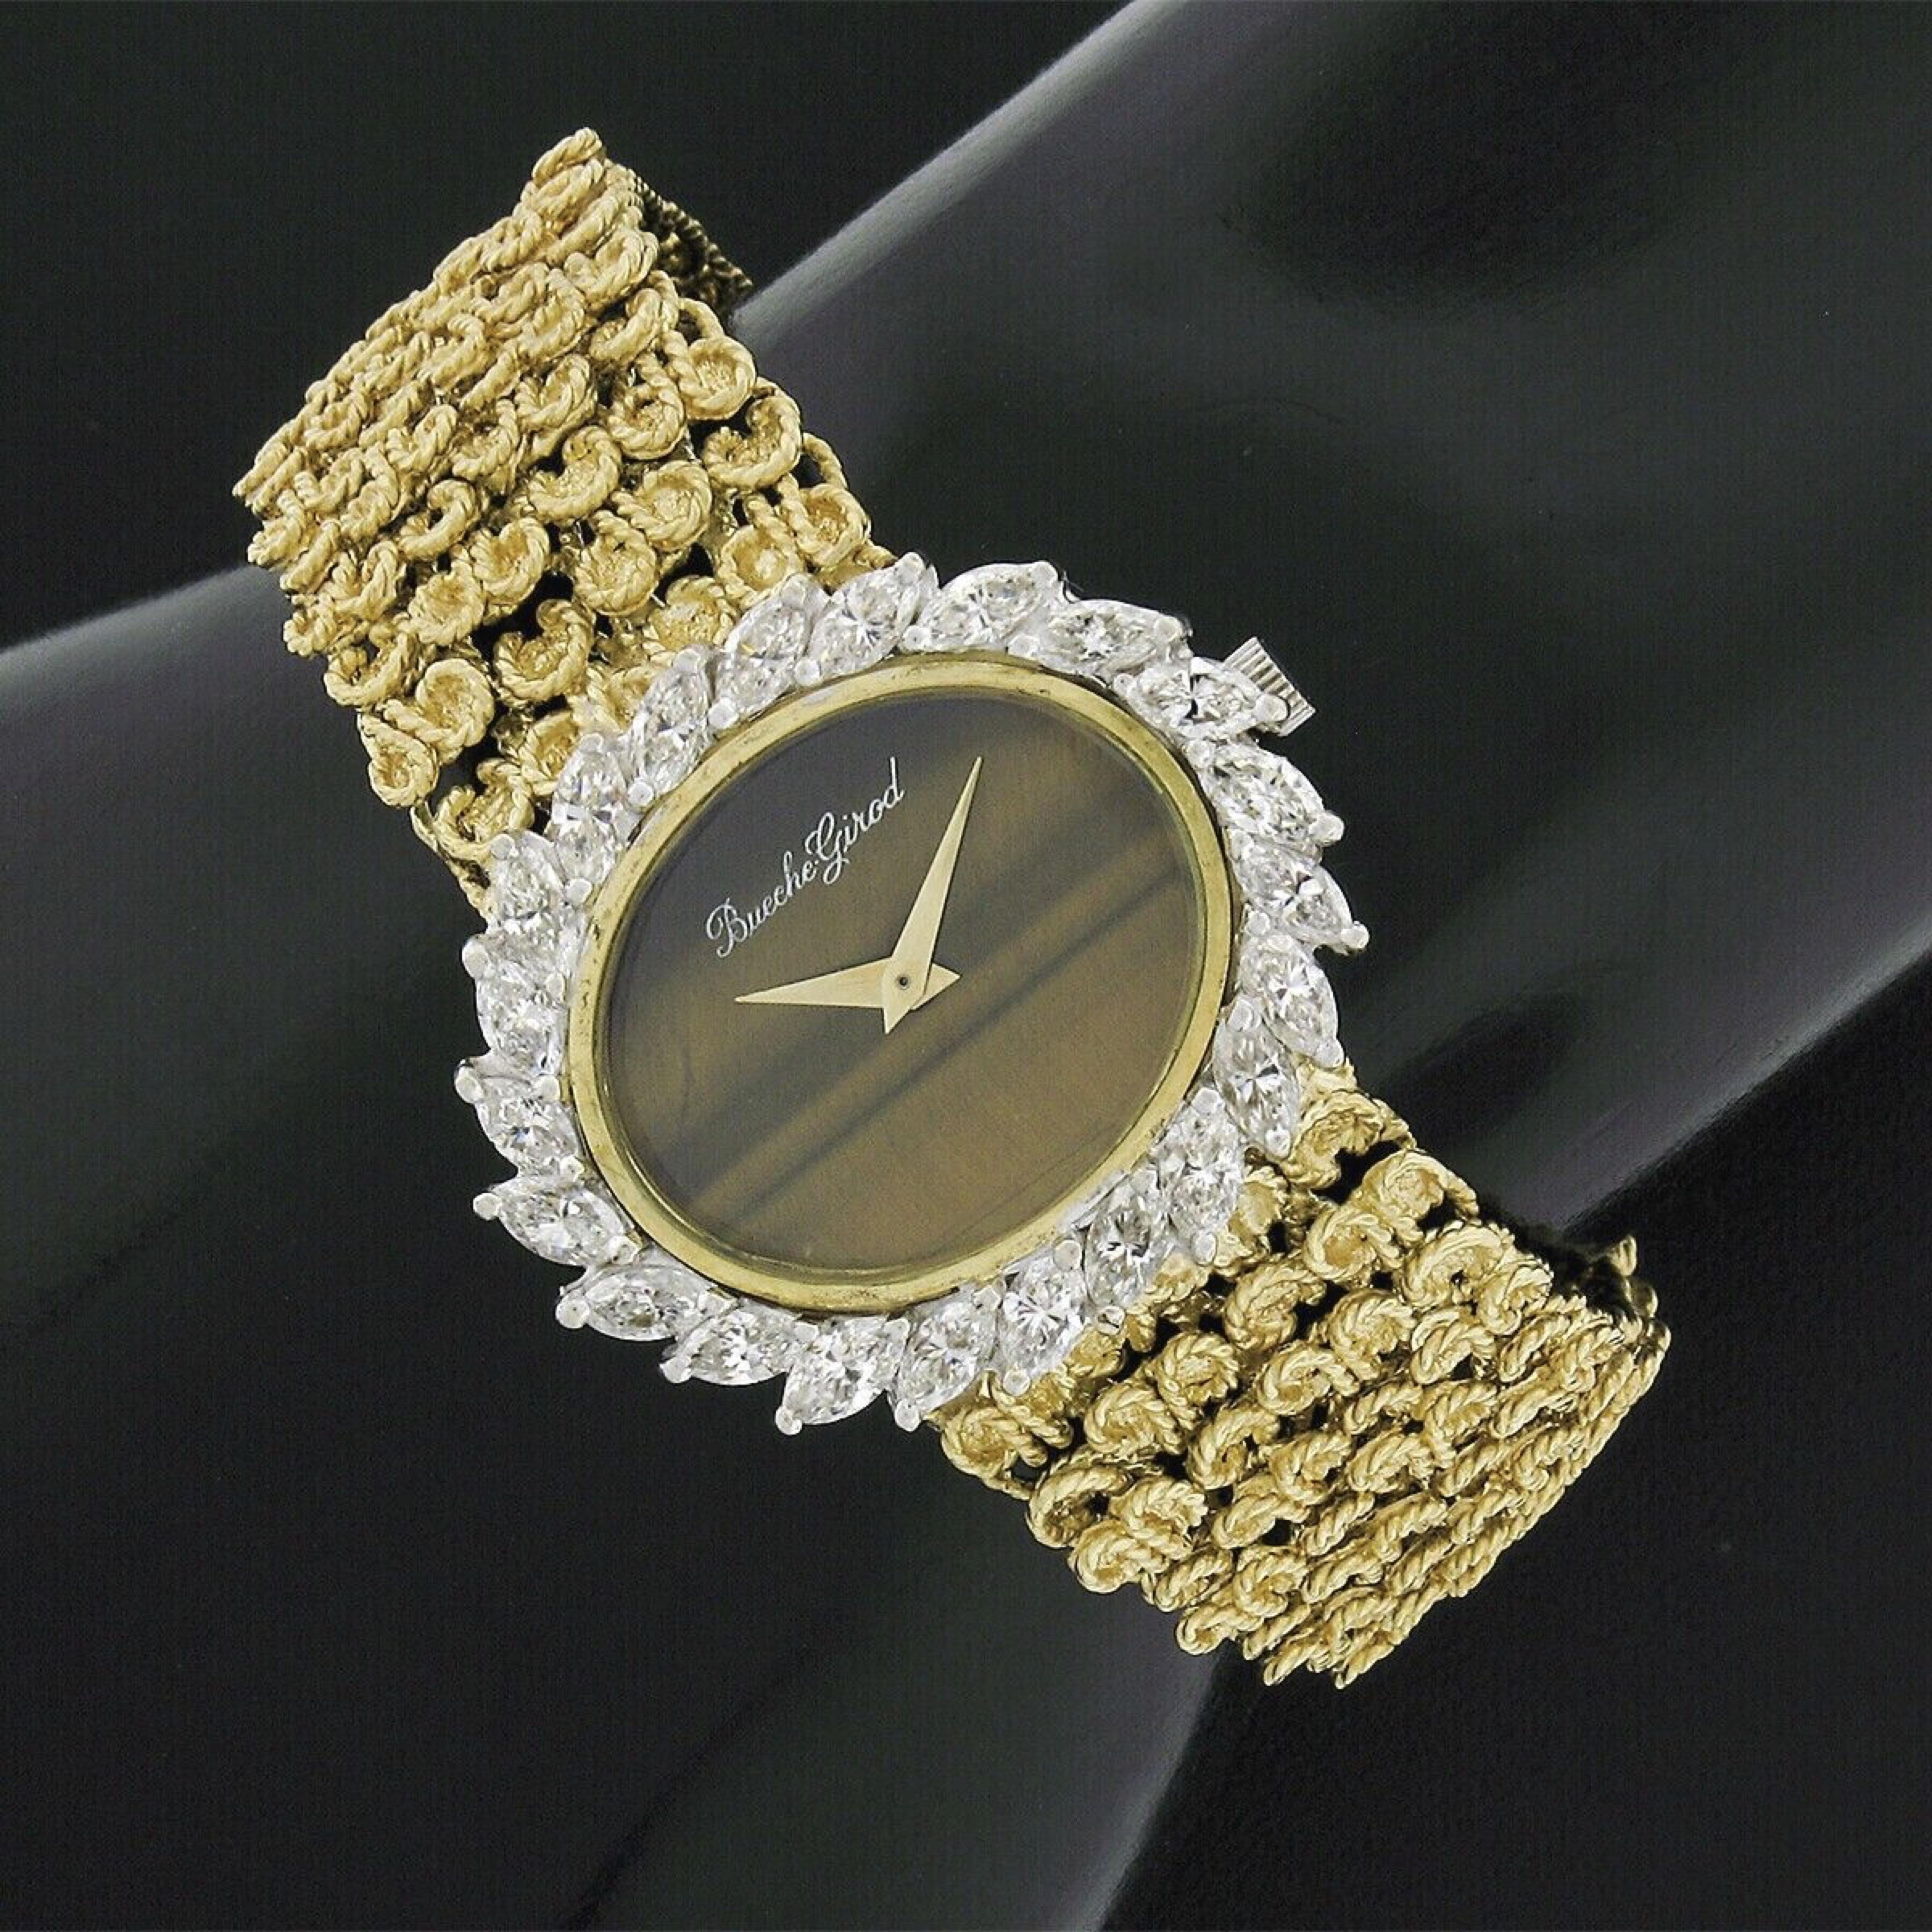 This classy, vintage, ladies' Bueche-Girod wrist watch is mounted in its original solid 18k yellow and white gold case. The case is permanently affixed to its original 18.22mm solid 18k yellow gold twisted wire pattern bracelet. The 